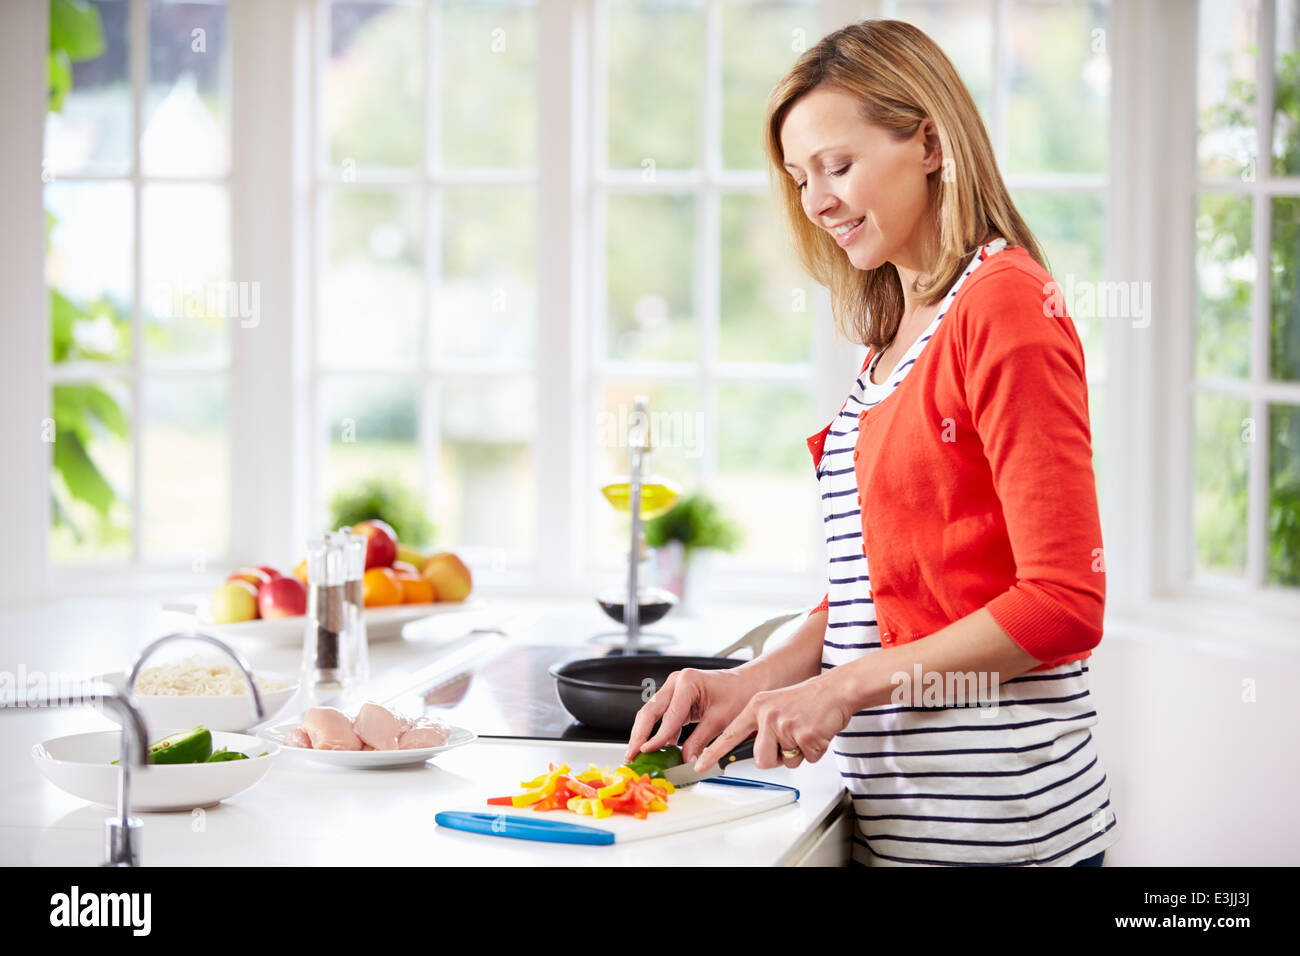 Woman Standing At Counter Preparing Meal In Kitchen Stock Photo